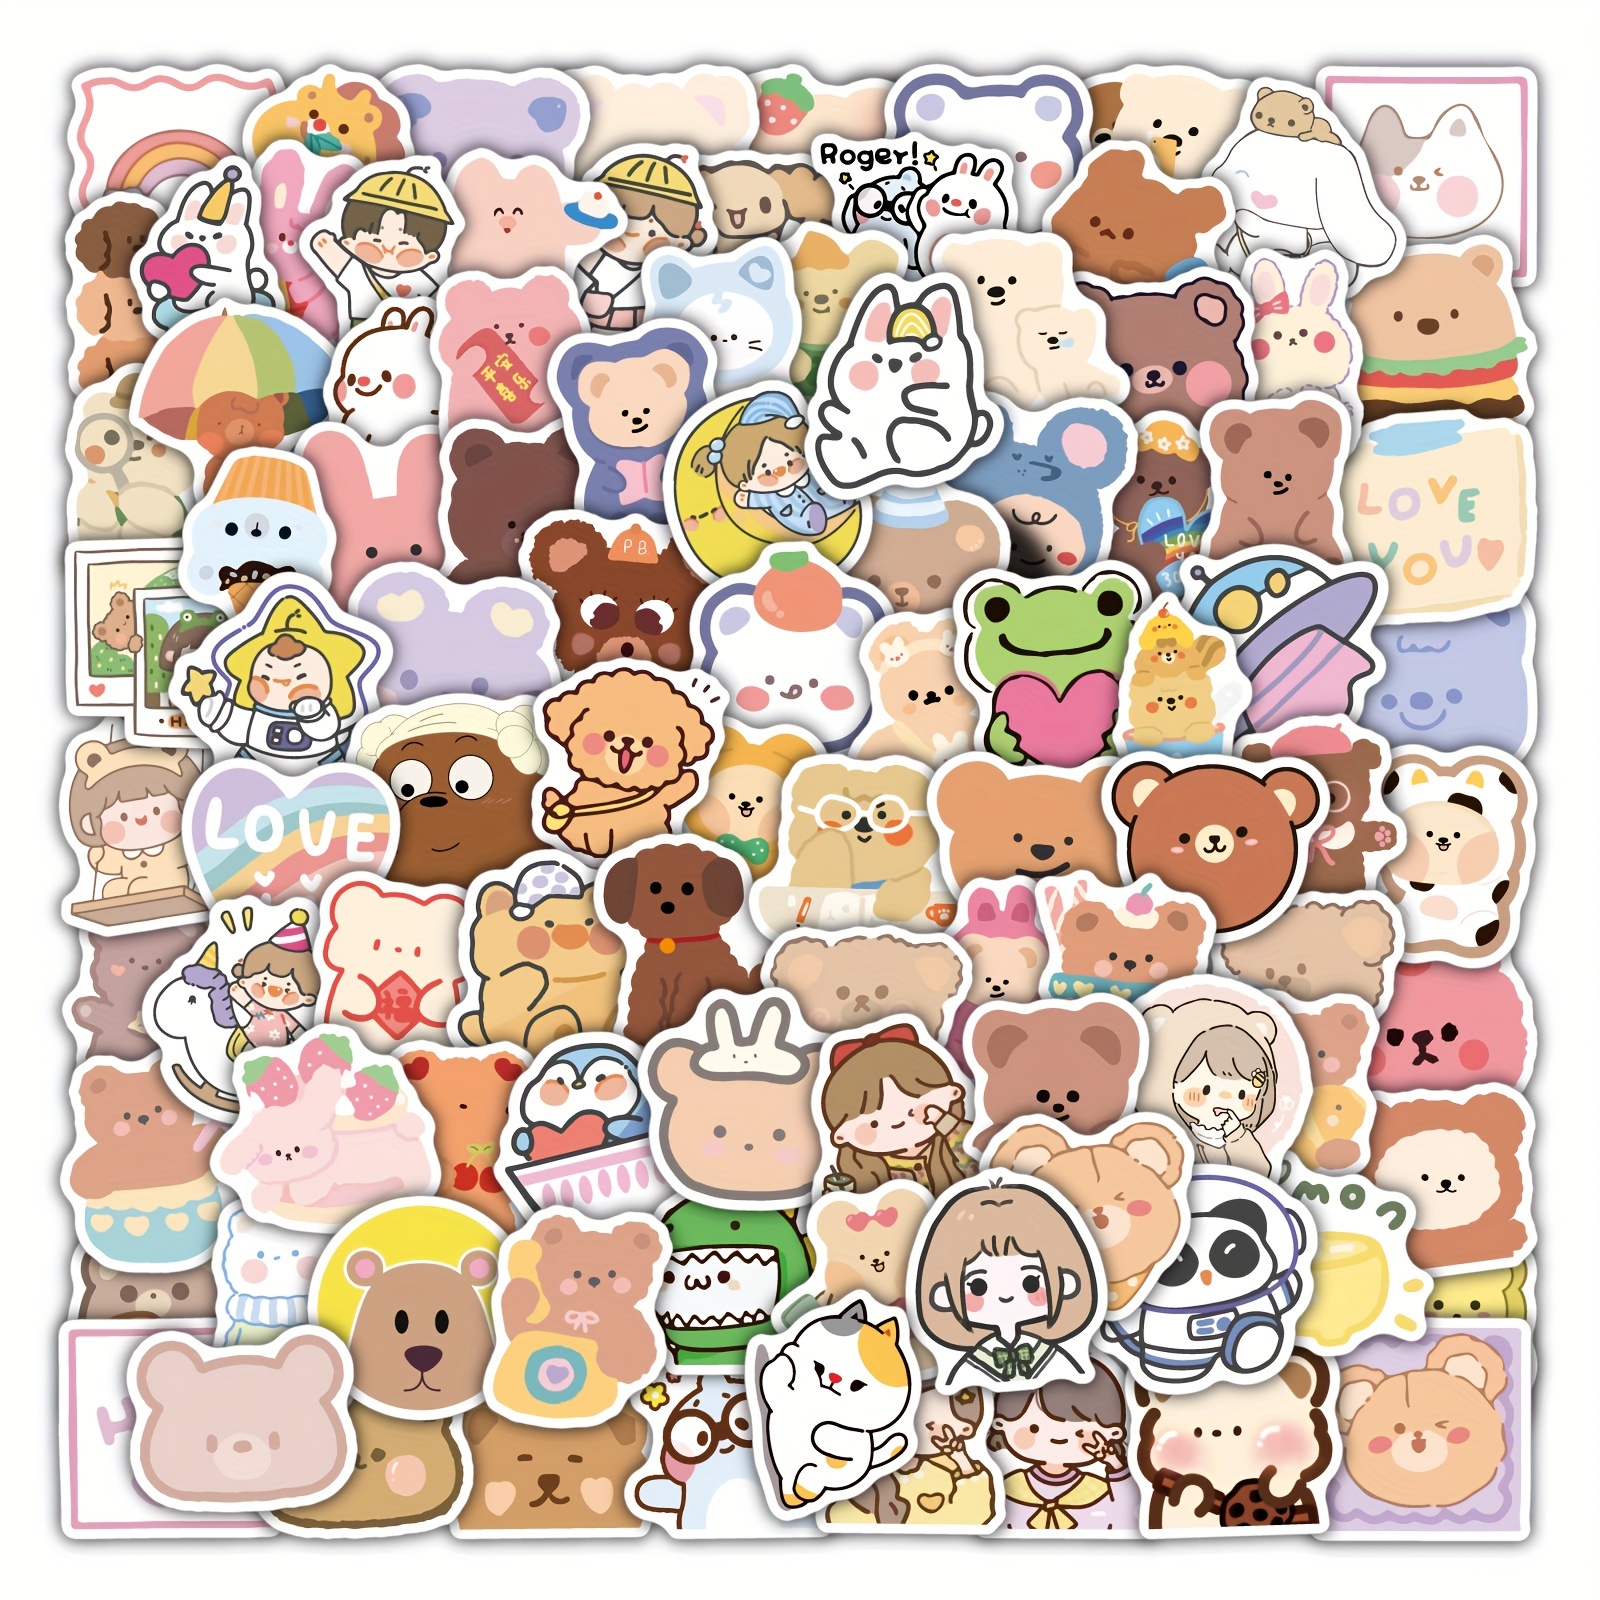  Cute Korean Bear Stickers Gifts for Girls Kids and Teens,  100pcs/Pack Small Kawaii Rilakkuma Stickers, Vinyl Waterproof Lovely  Aesthetic Stickers Decals for Laptop Water Bottles Phone Scrapbooking :  Electronics